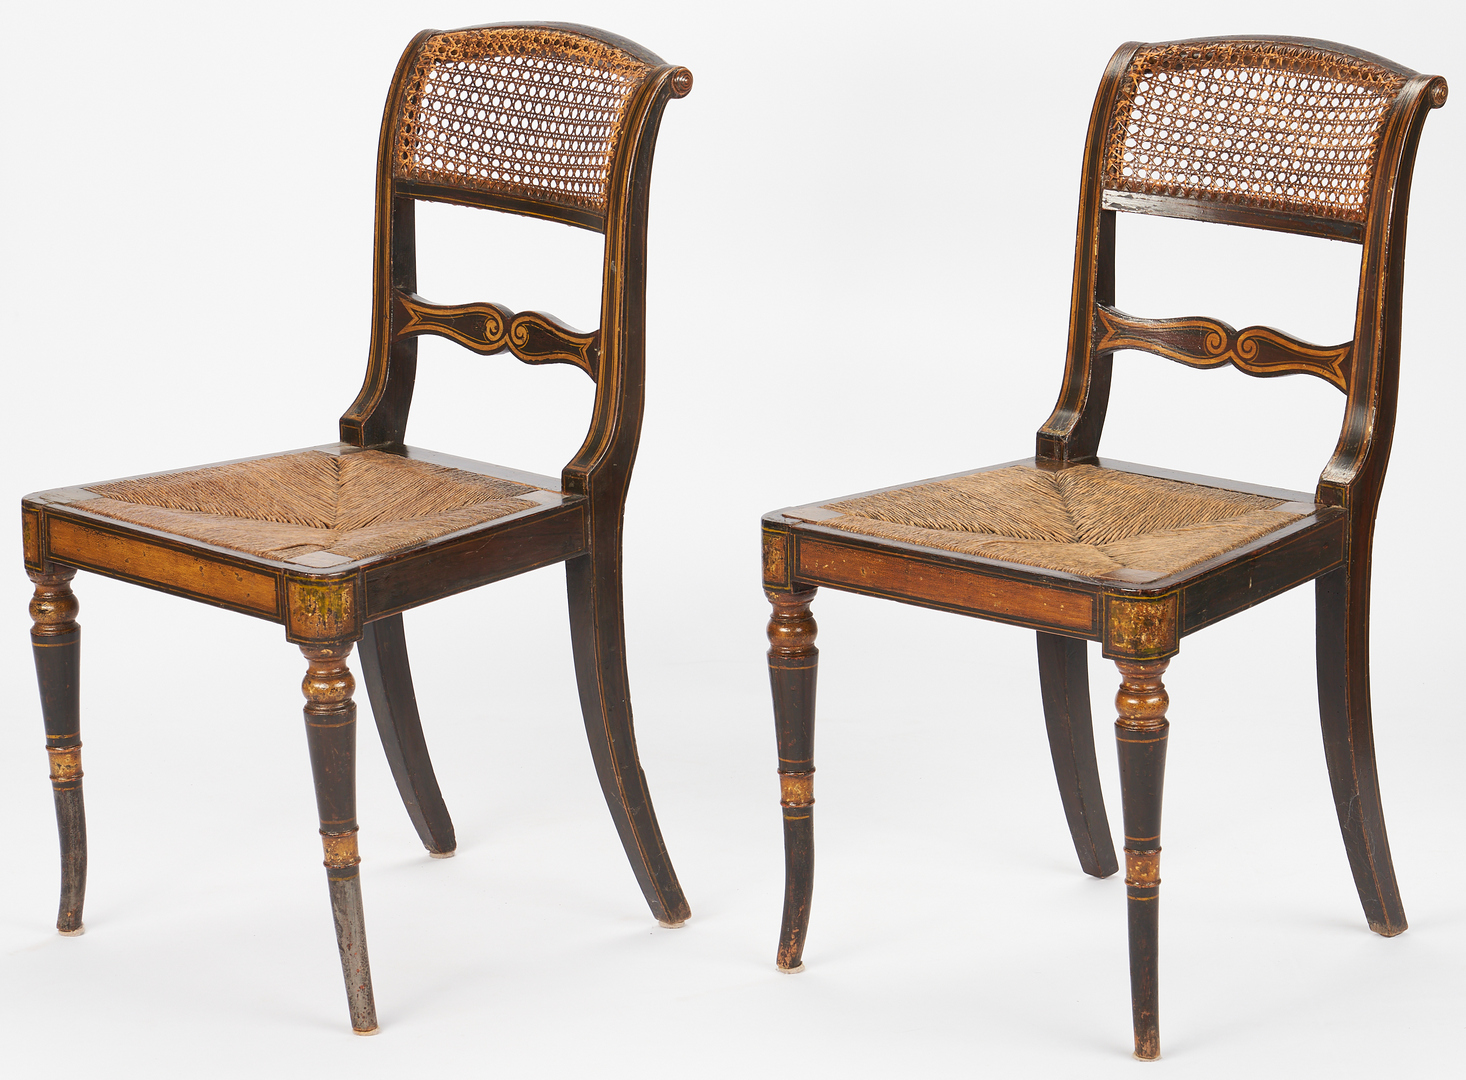 Lot 235: Set of 12 English Regency Paint Decorated Chairs